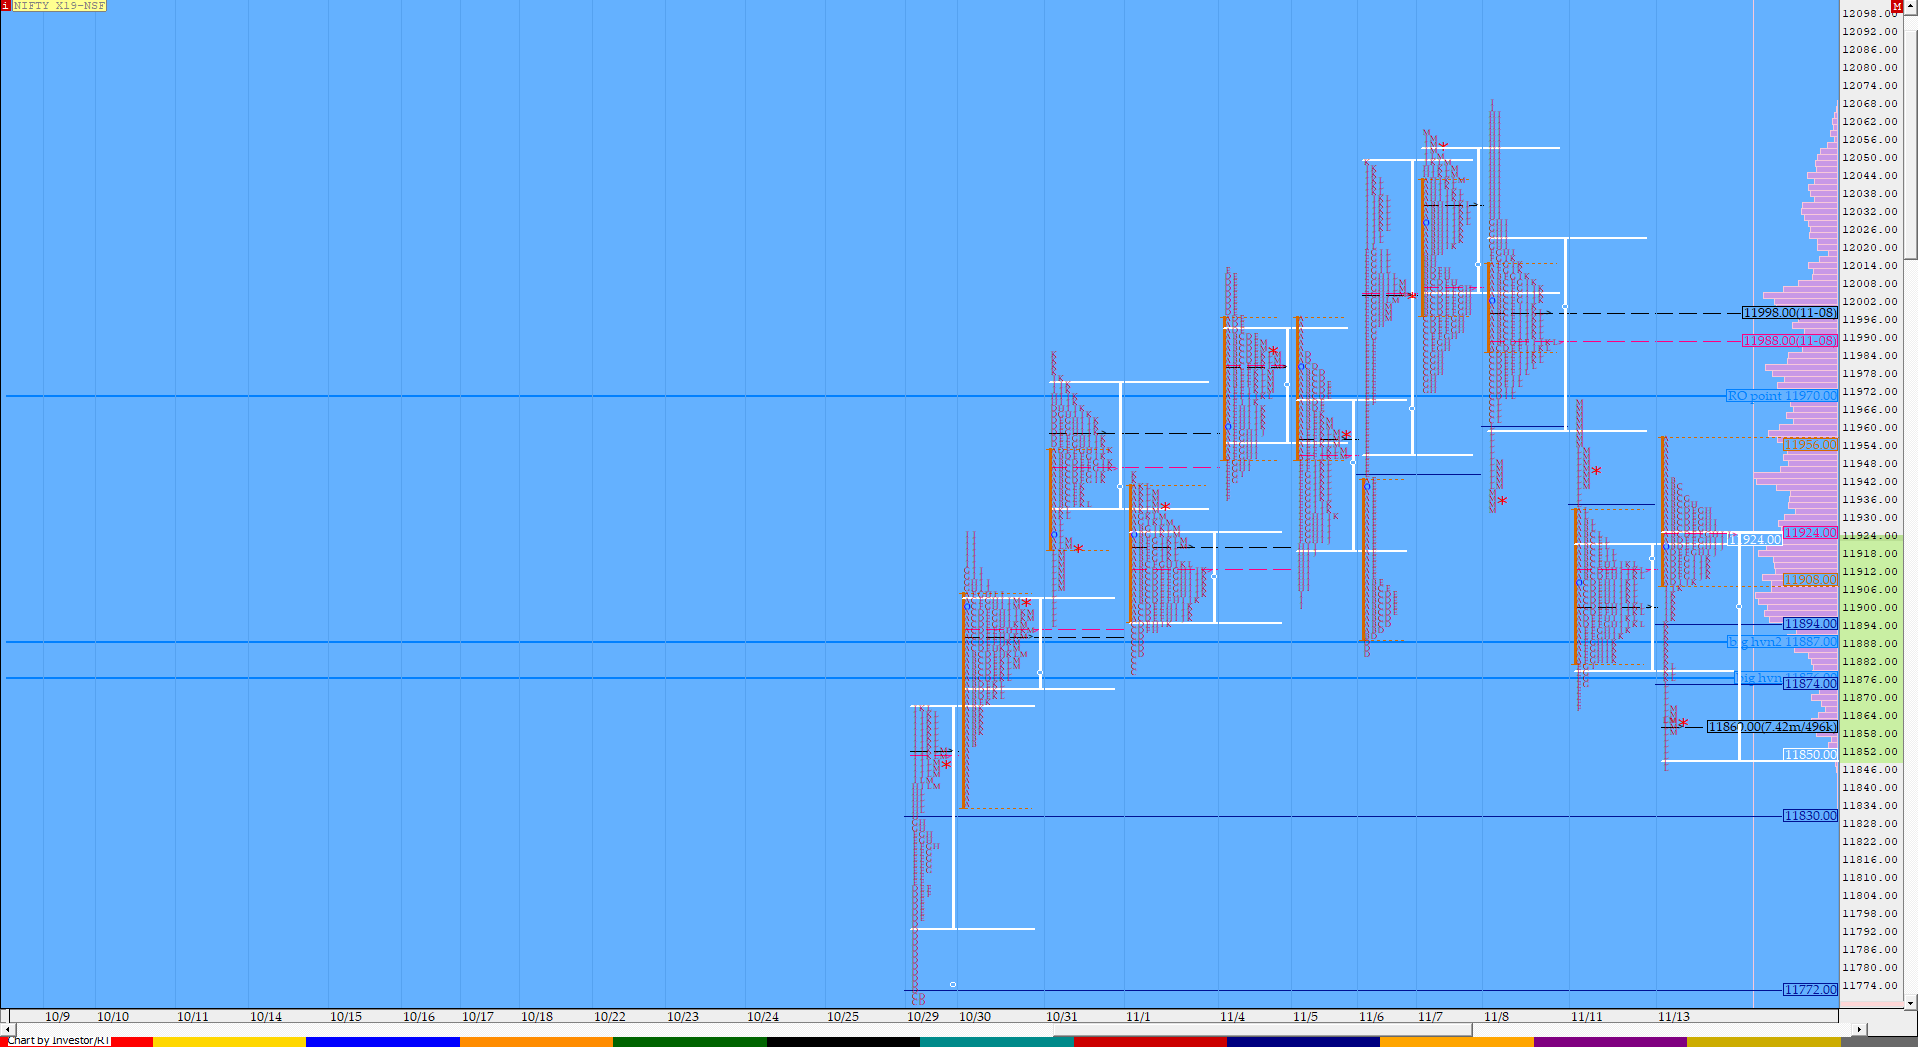 Nf Compo1 8 Market Profile Analysis Dated 13Th November Banknifty Futures, Charts, Day Trading, Intraday Trading, Intraday Trading Strategies, Market Profile, Market Profile Trading Strategies, Nifty Futures, Order Flow Analysis, Support And Resistance, Technical Analysis, Trading Strategies, Volume Profile Trading